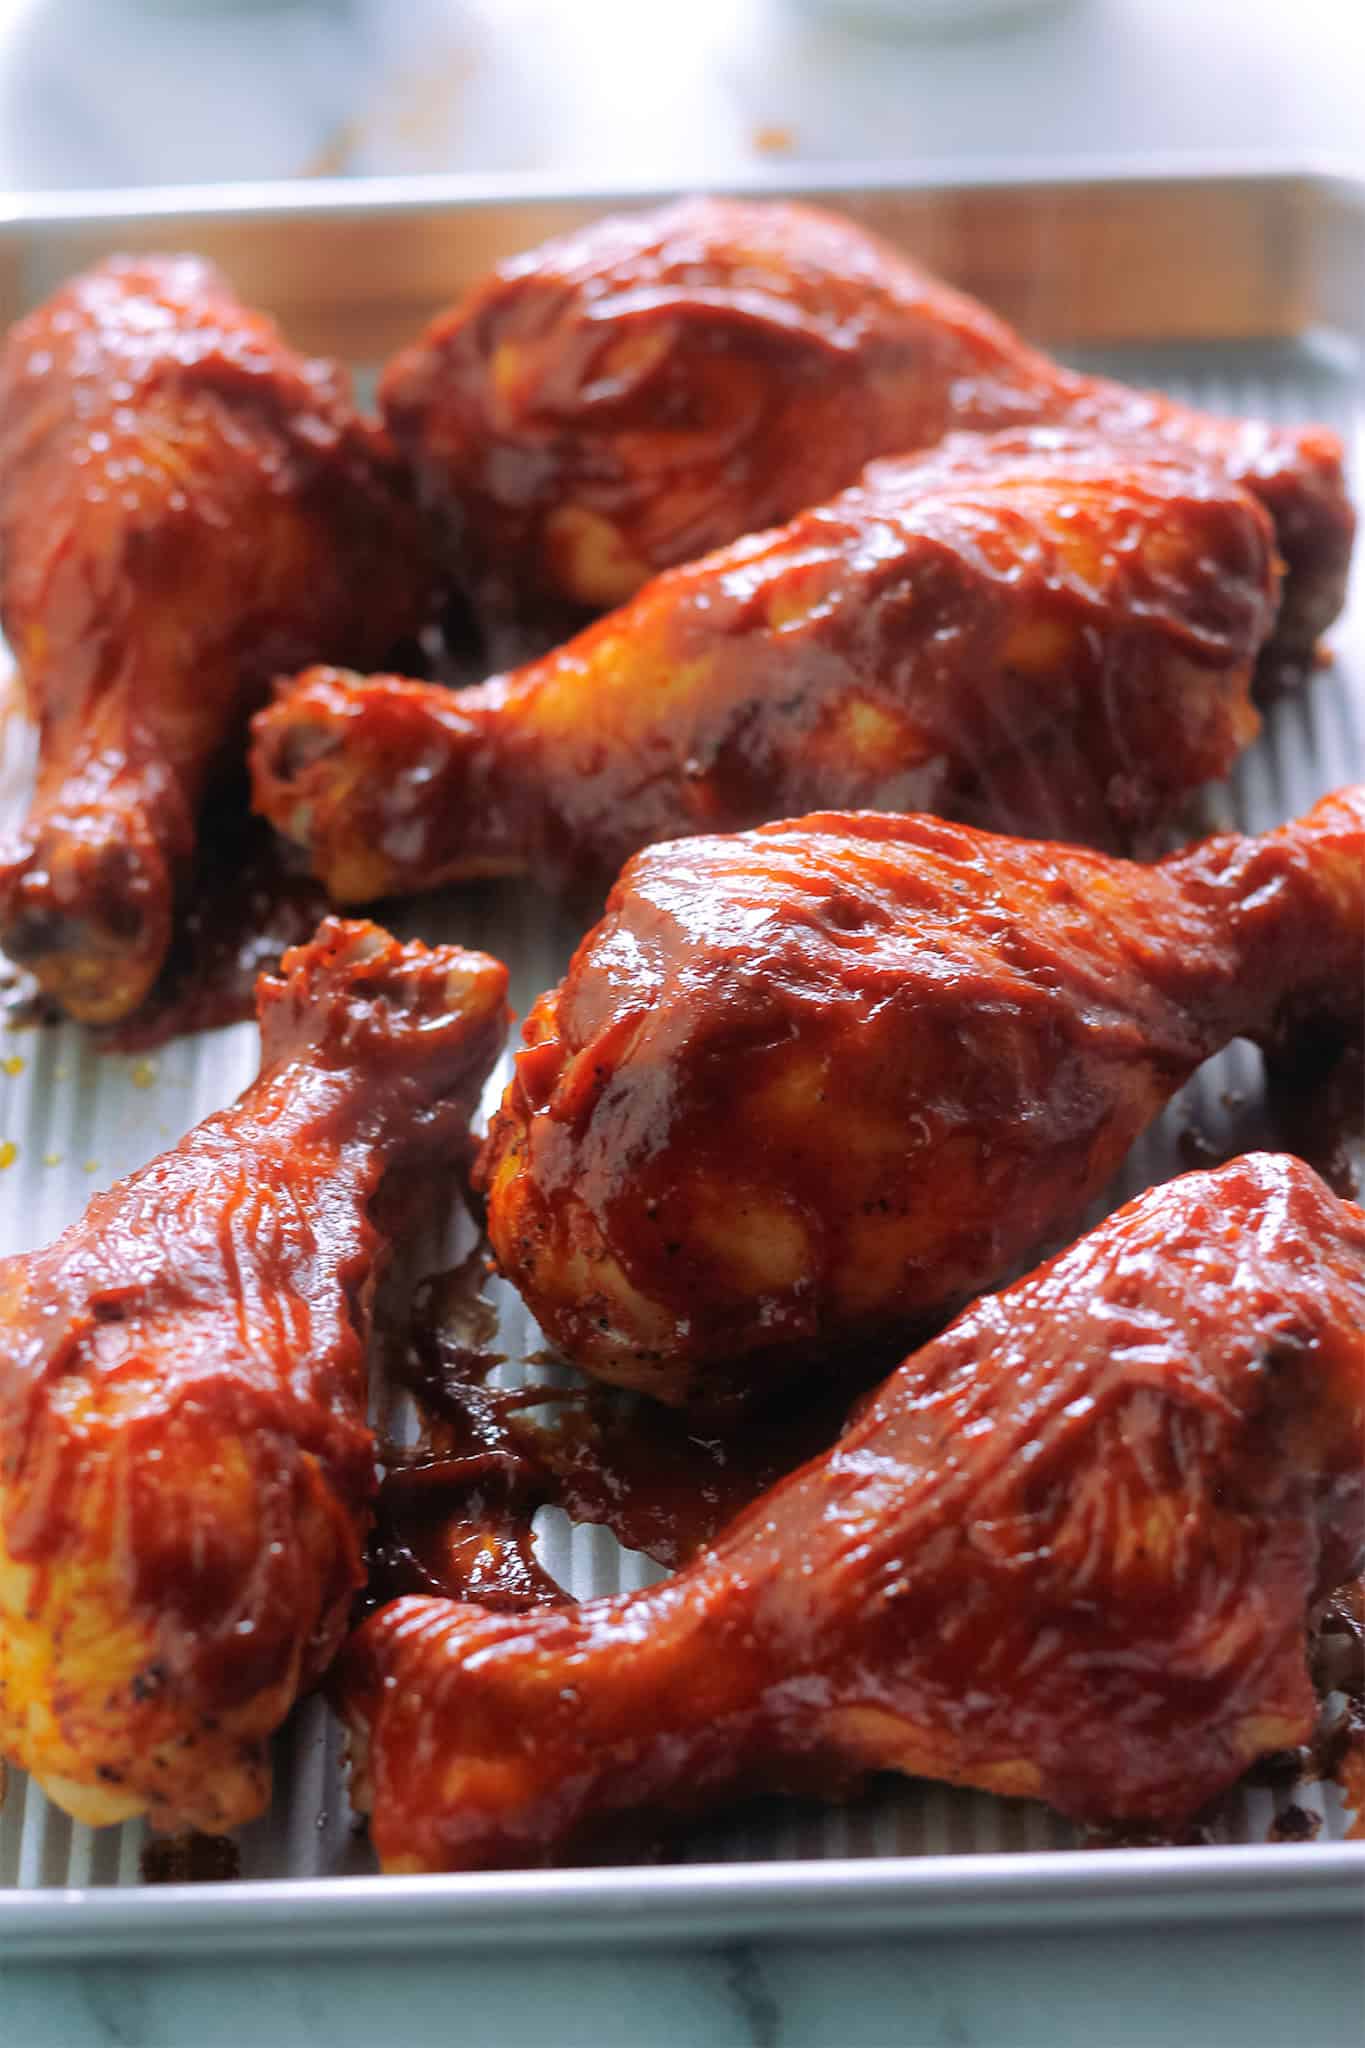 Partially cooked drumsticks smothered in barbecue sauce on sheet pan.